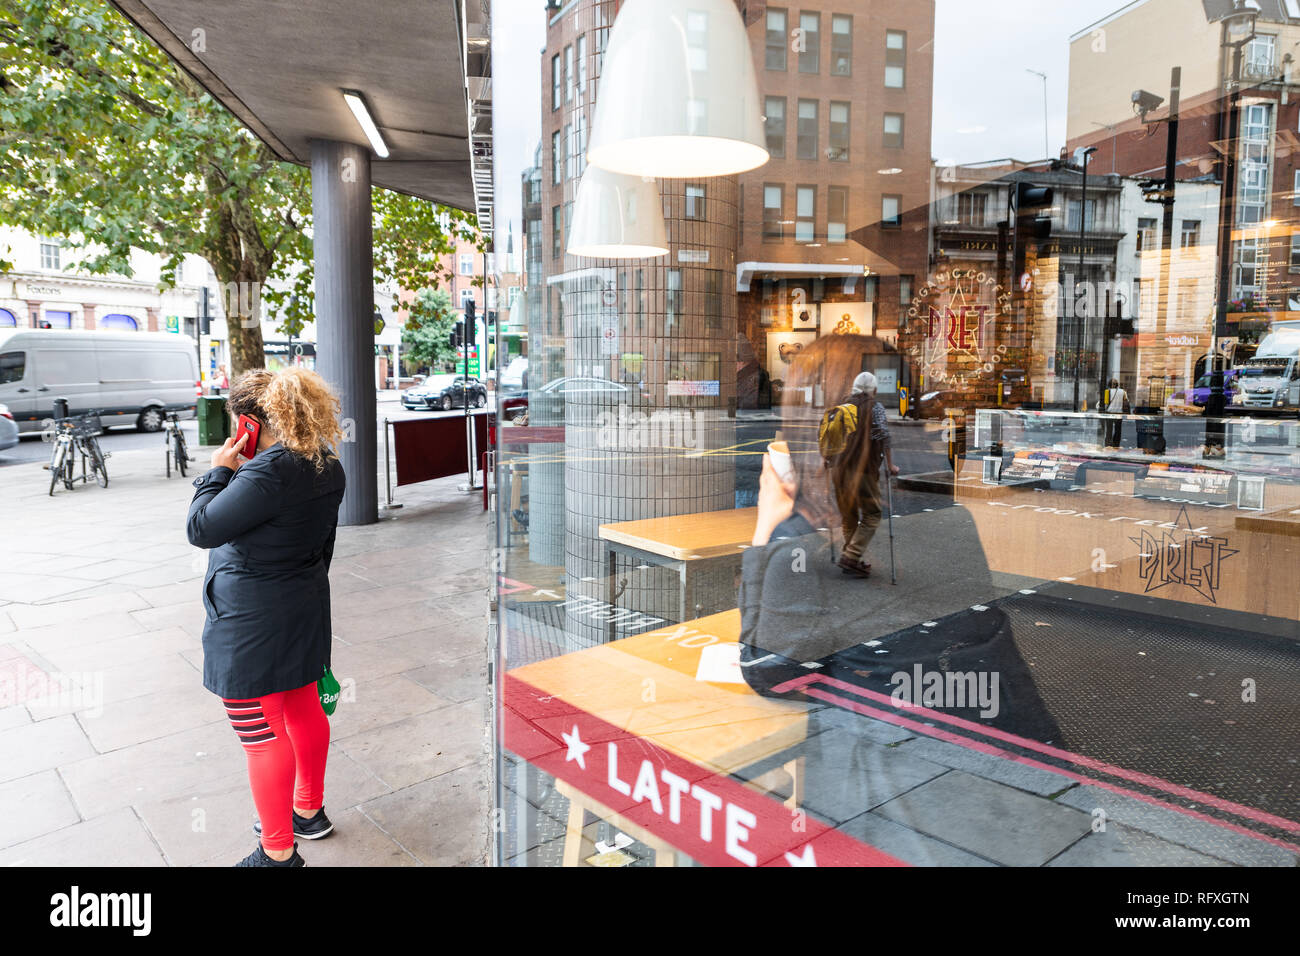 London, UK - September 12, 2018: Neighborhood of Pimlico Victoria with woman standing on sidewalk by Pret A Manger cafe restaurant window reflection Stock Photo